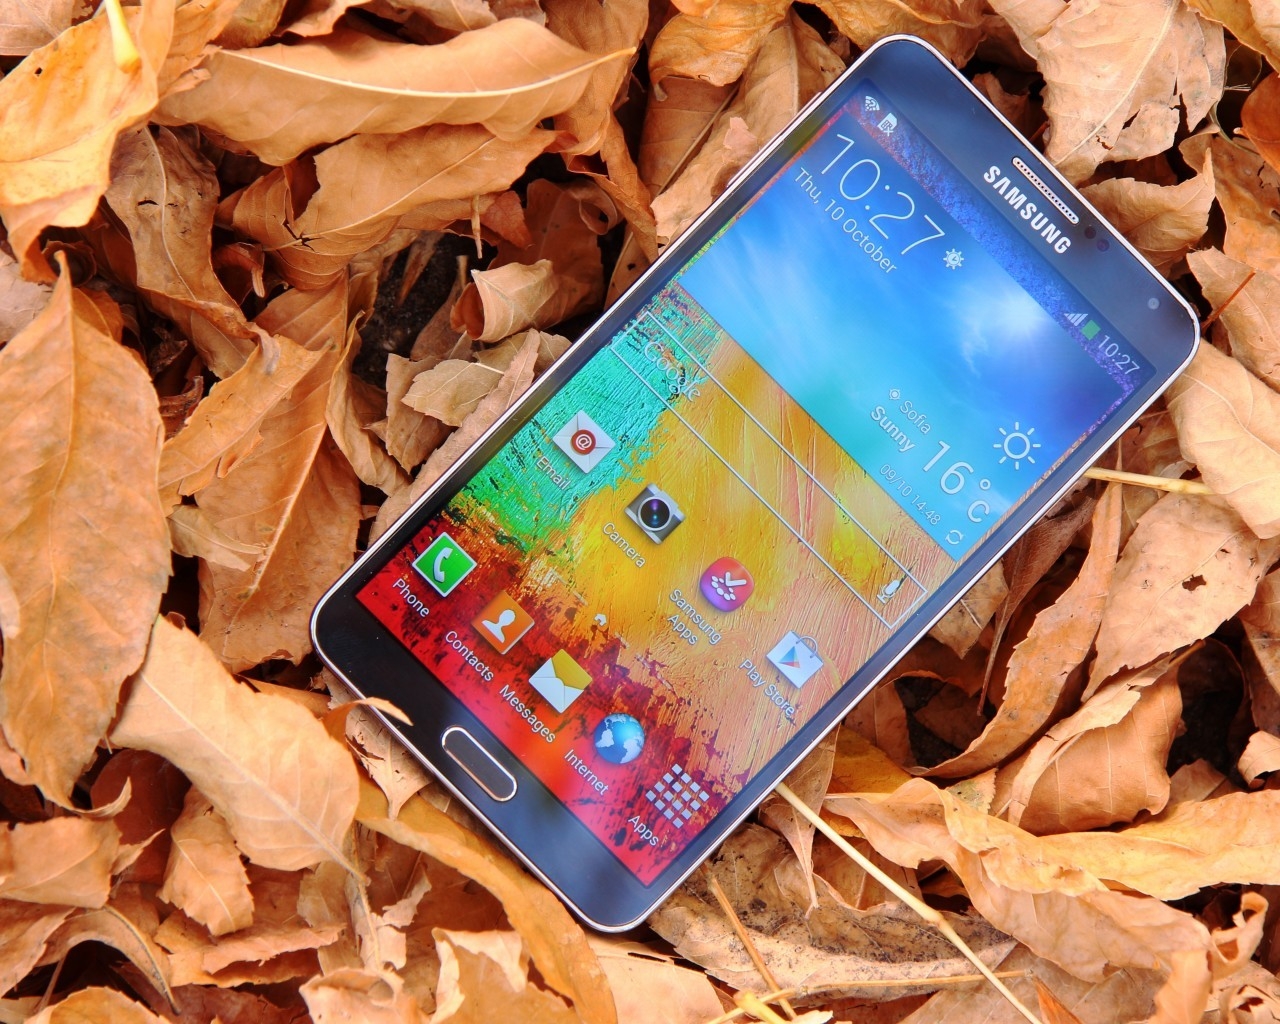 New Samsung Galaxy Note 3 for 1280 x 1024 resolution